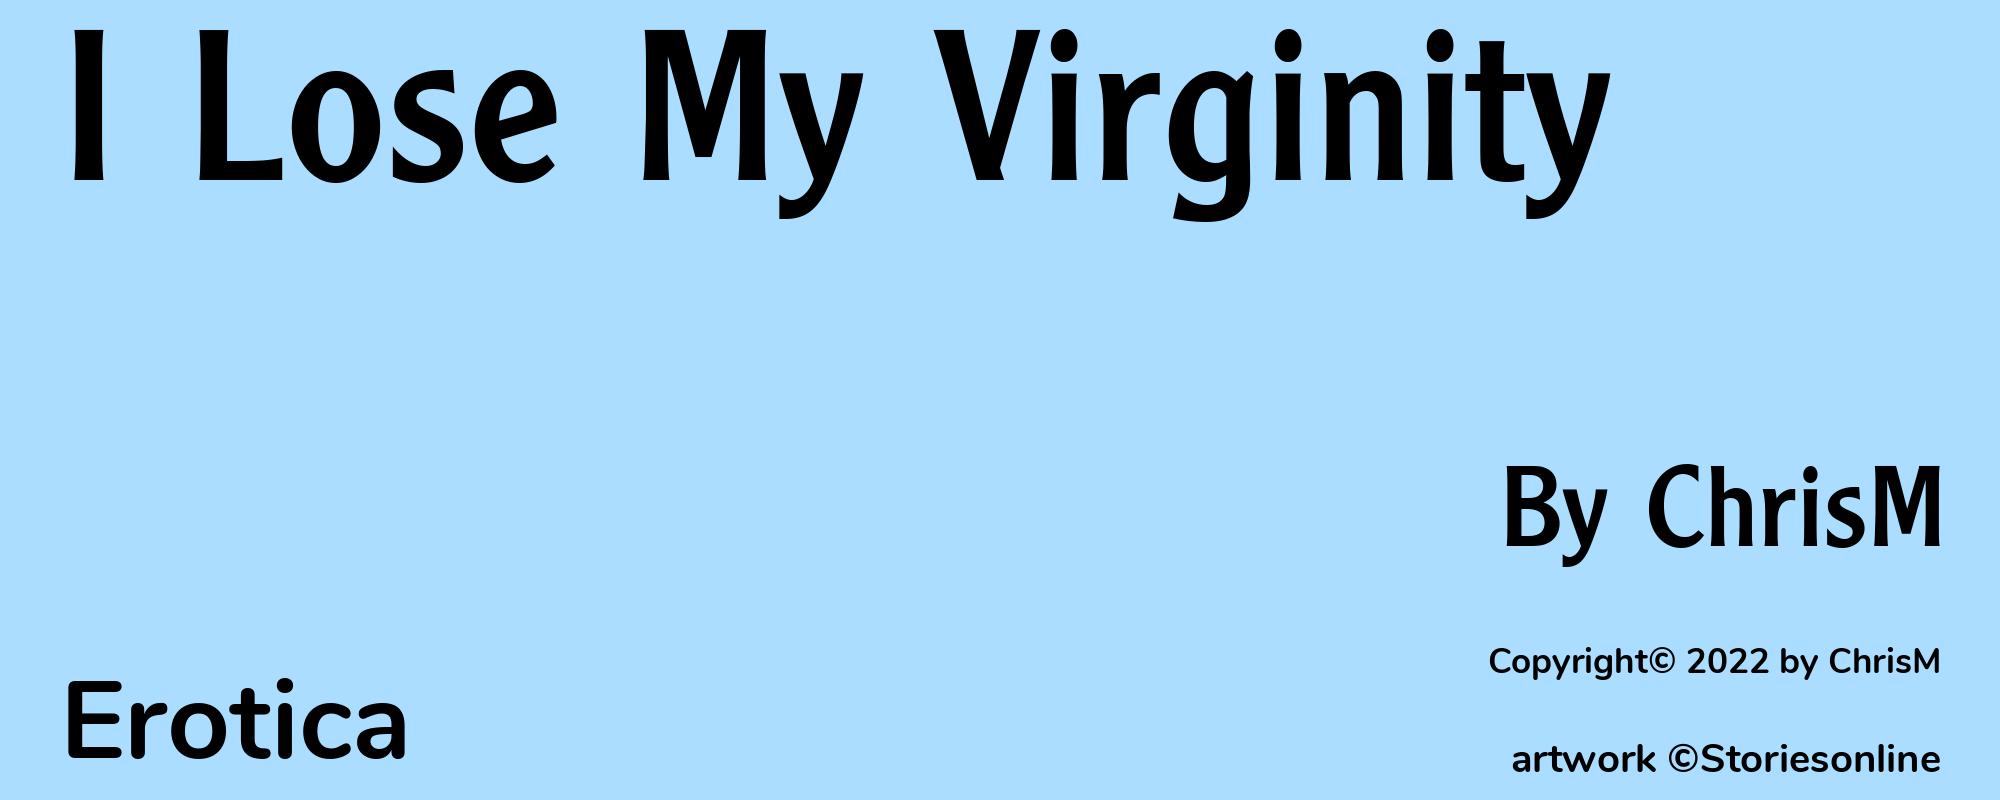 I Lose My Virginity - Cover